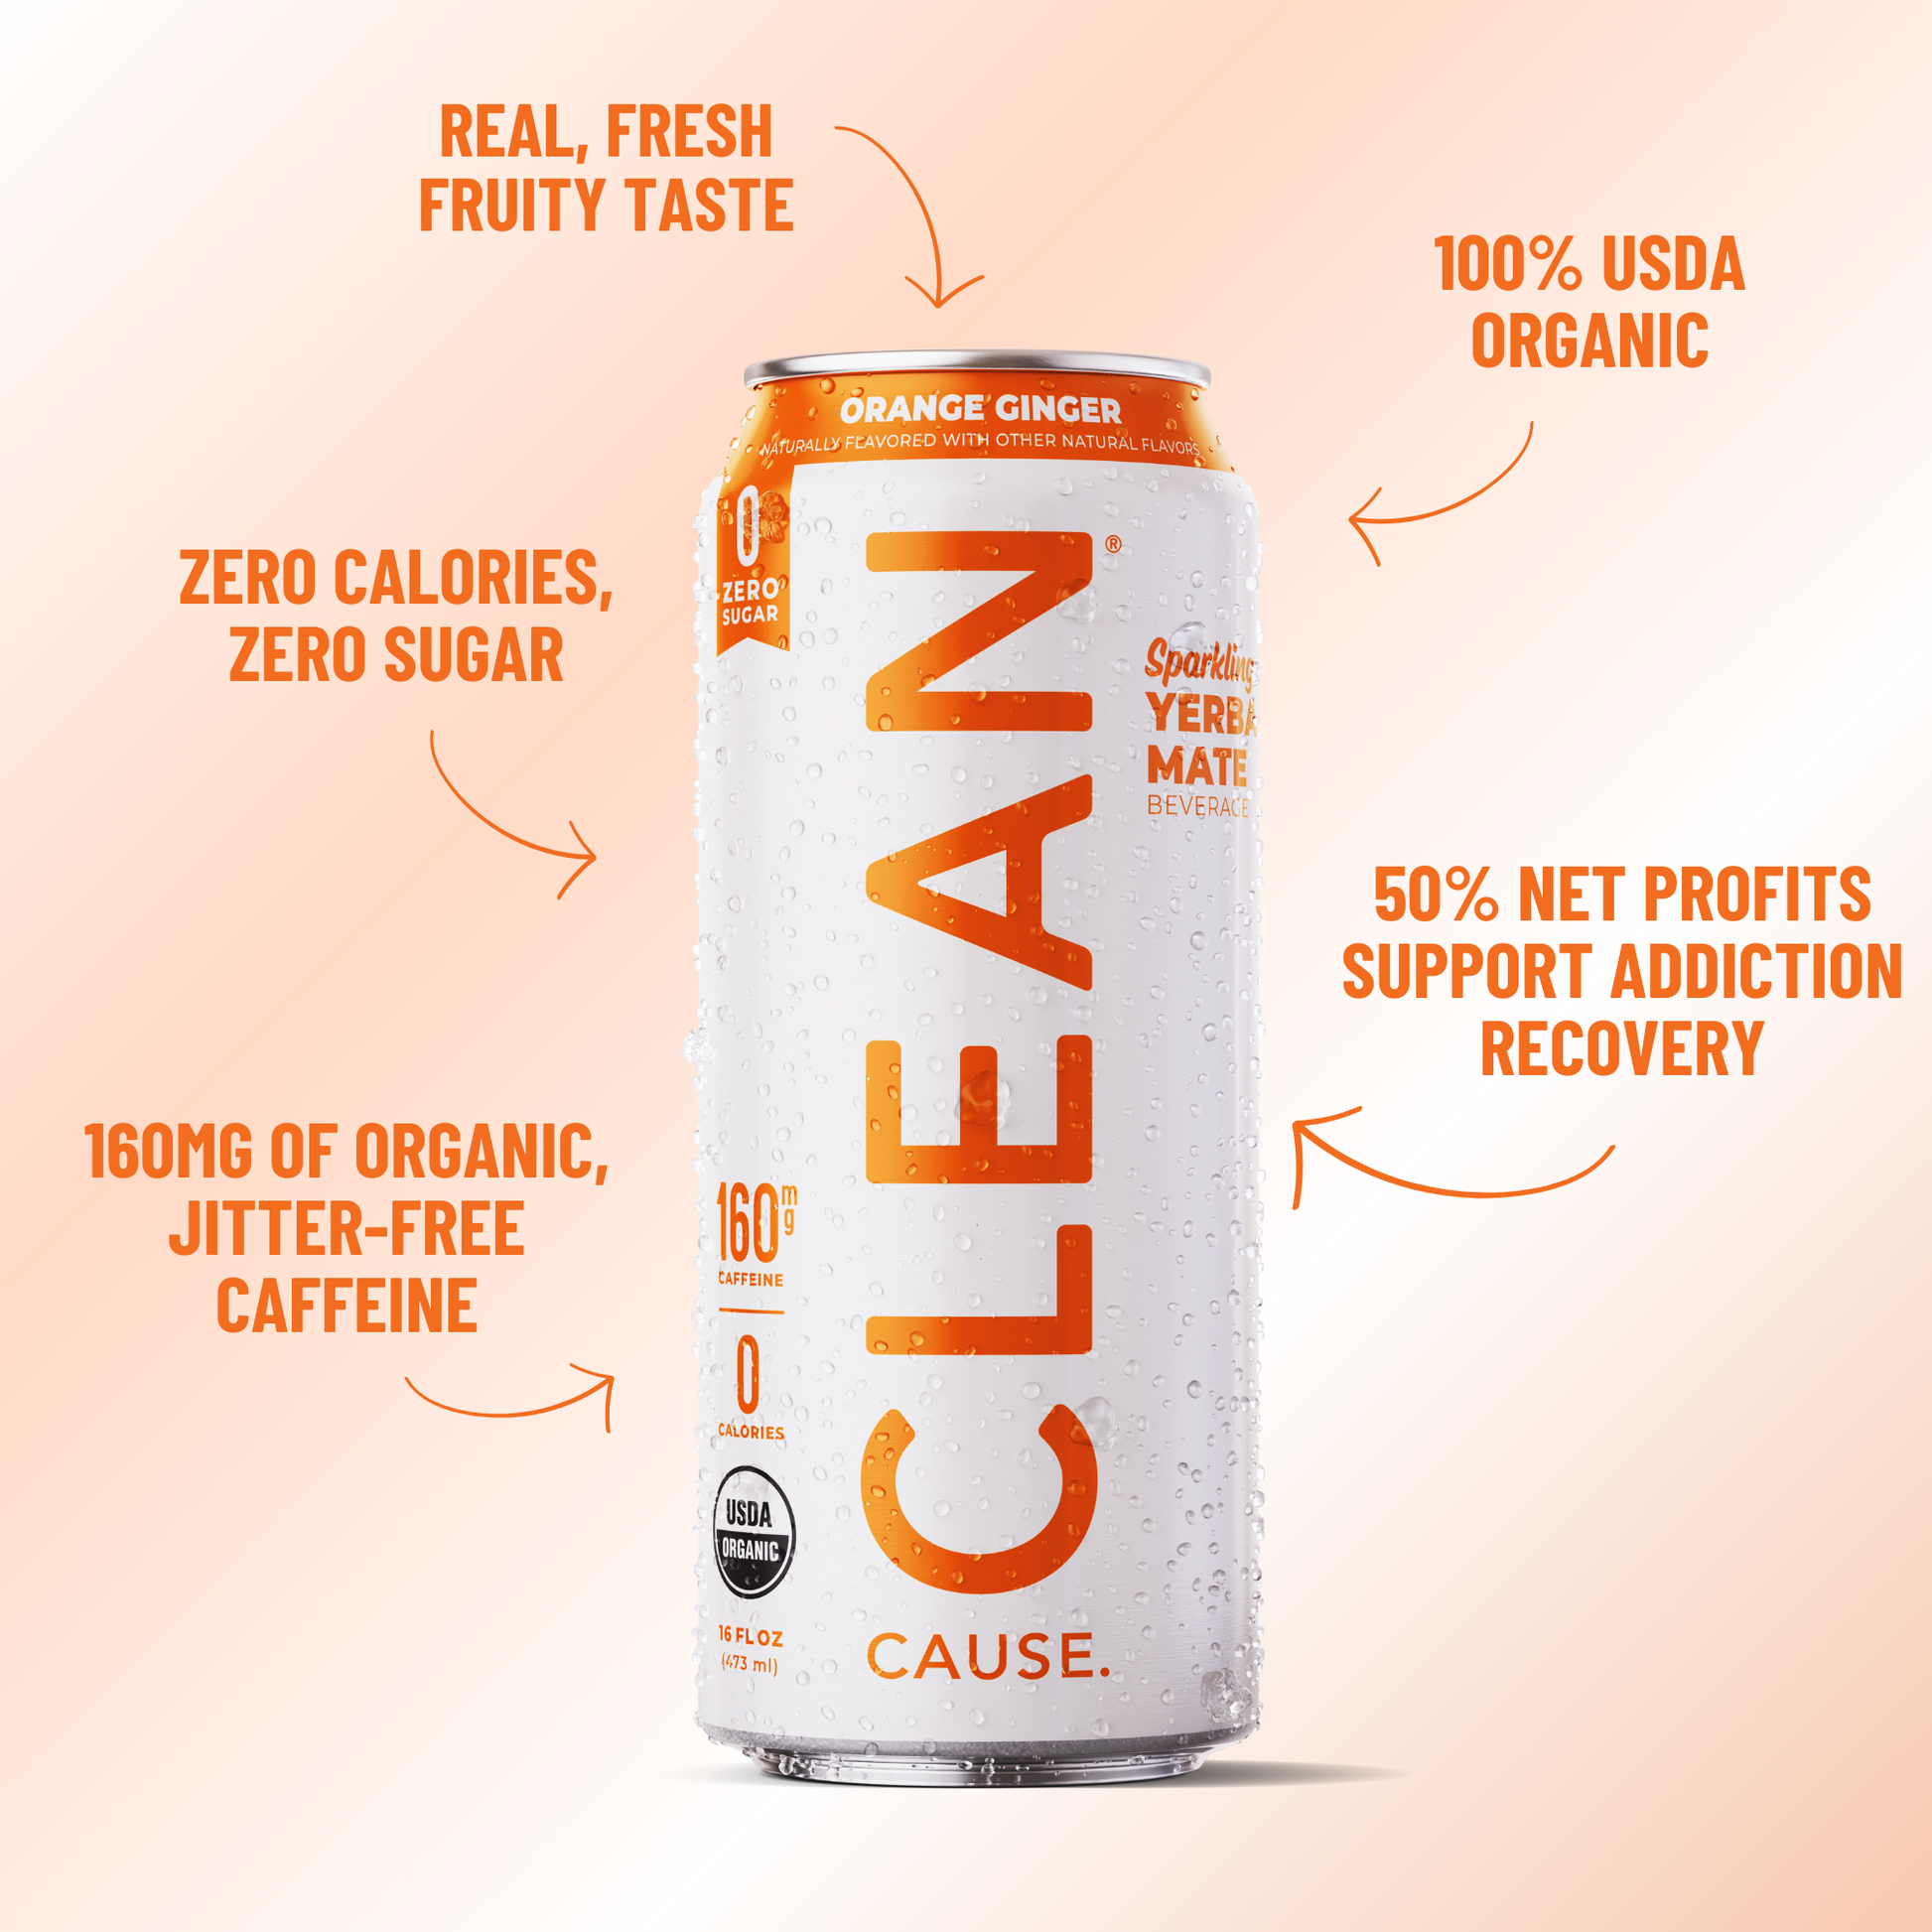 A can of CLEAN Cause Orange Ginger Yerba Mate with little attributes circling it: 160mg of organic jitter-free caffeine, zero calories zero sugar, real fresh fruity taste, 100% USDA organic, 50% net profits support addiction recovery